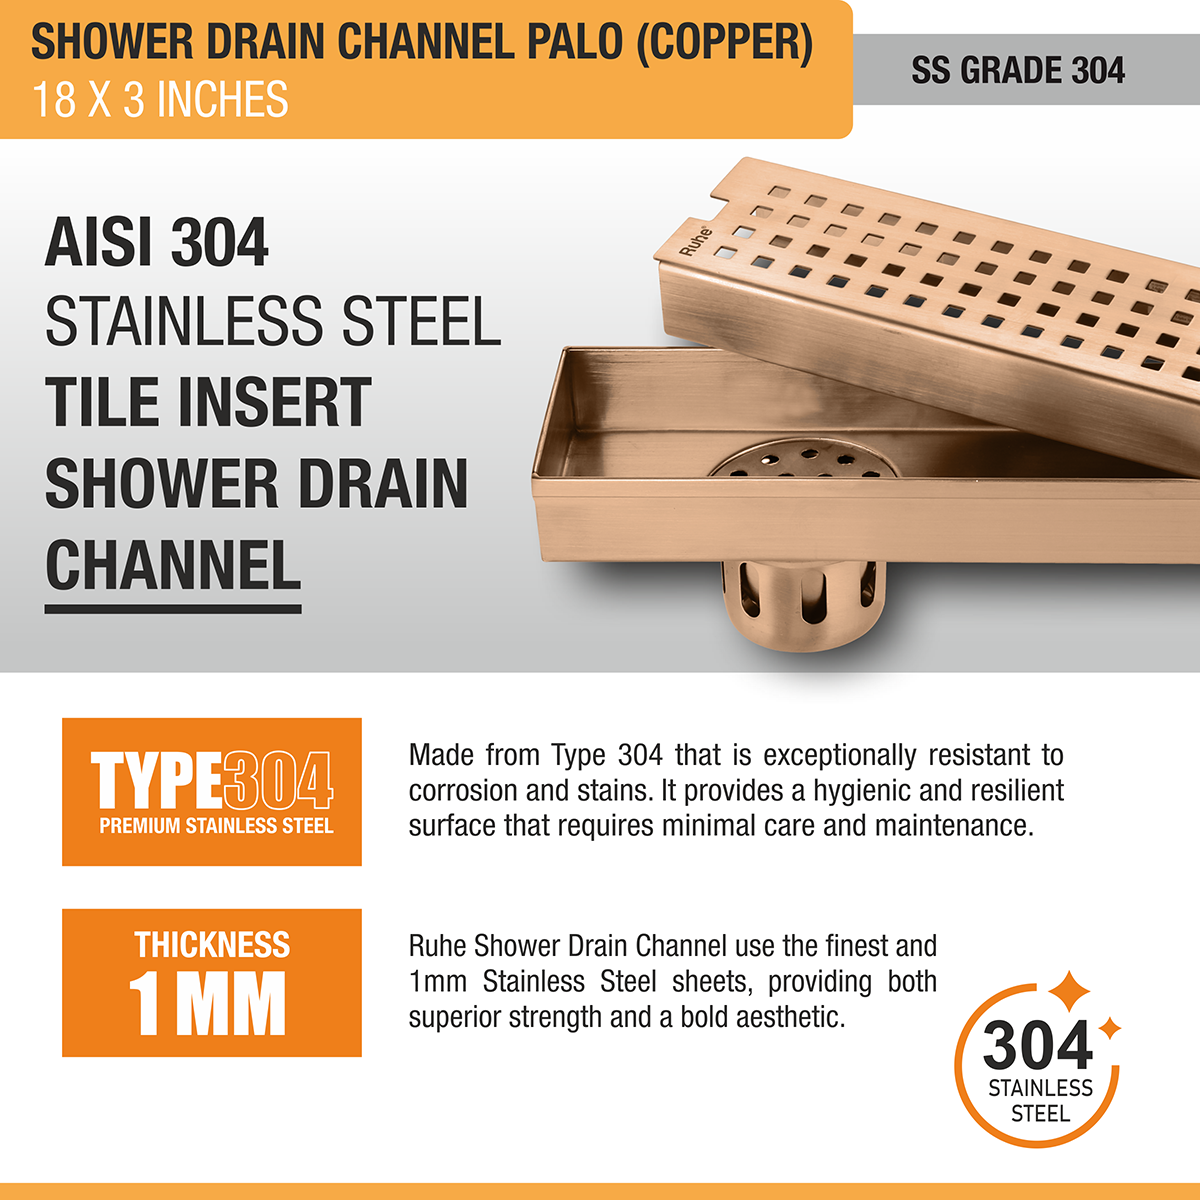 Palo Shower Drain Channel (18 x 3 Inches) ROSE GOLD/ANTIQUE COPPER stainless steel